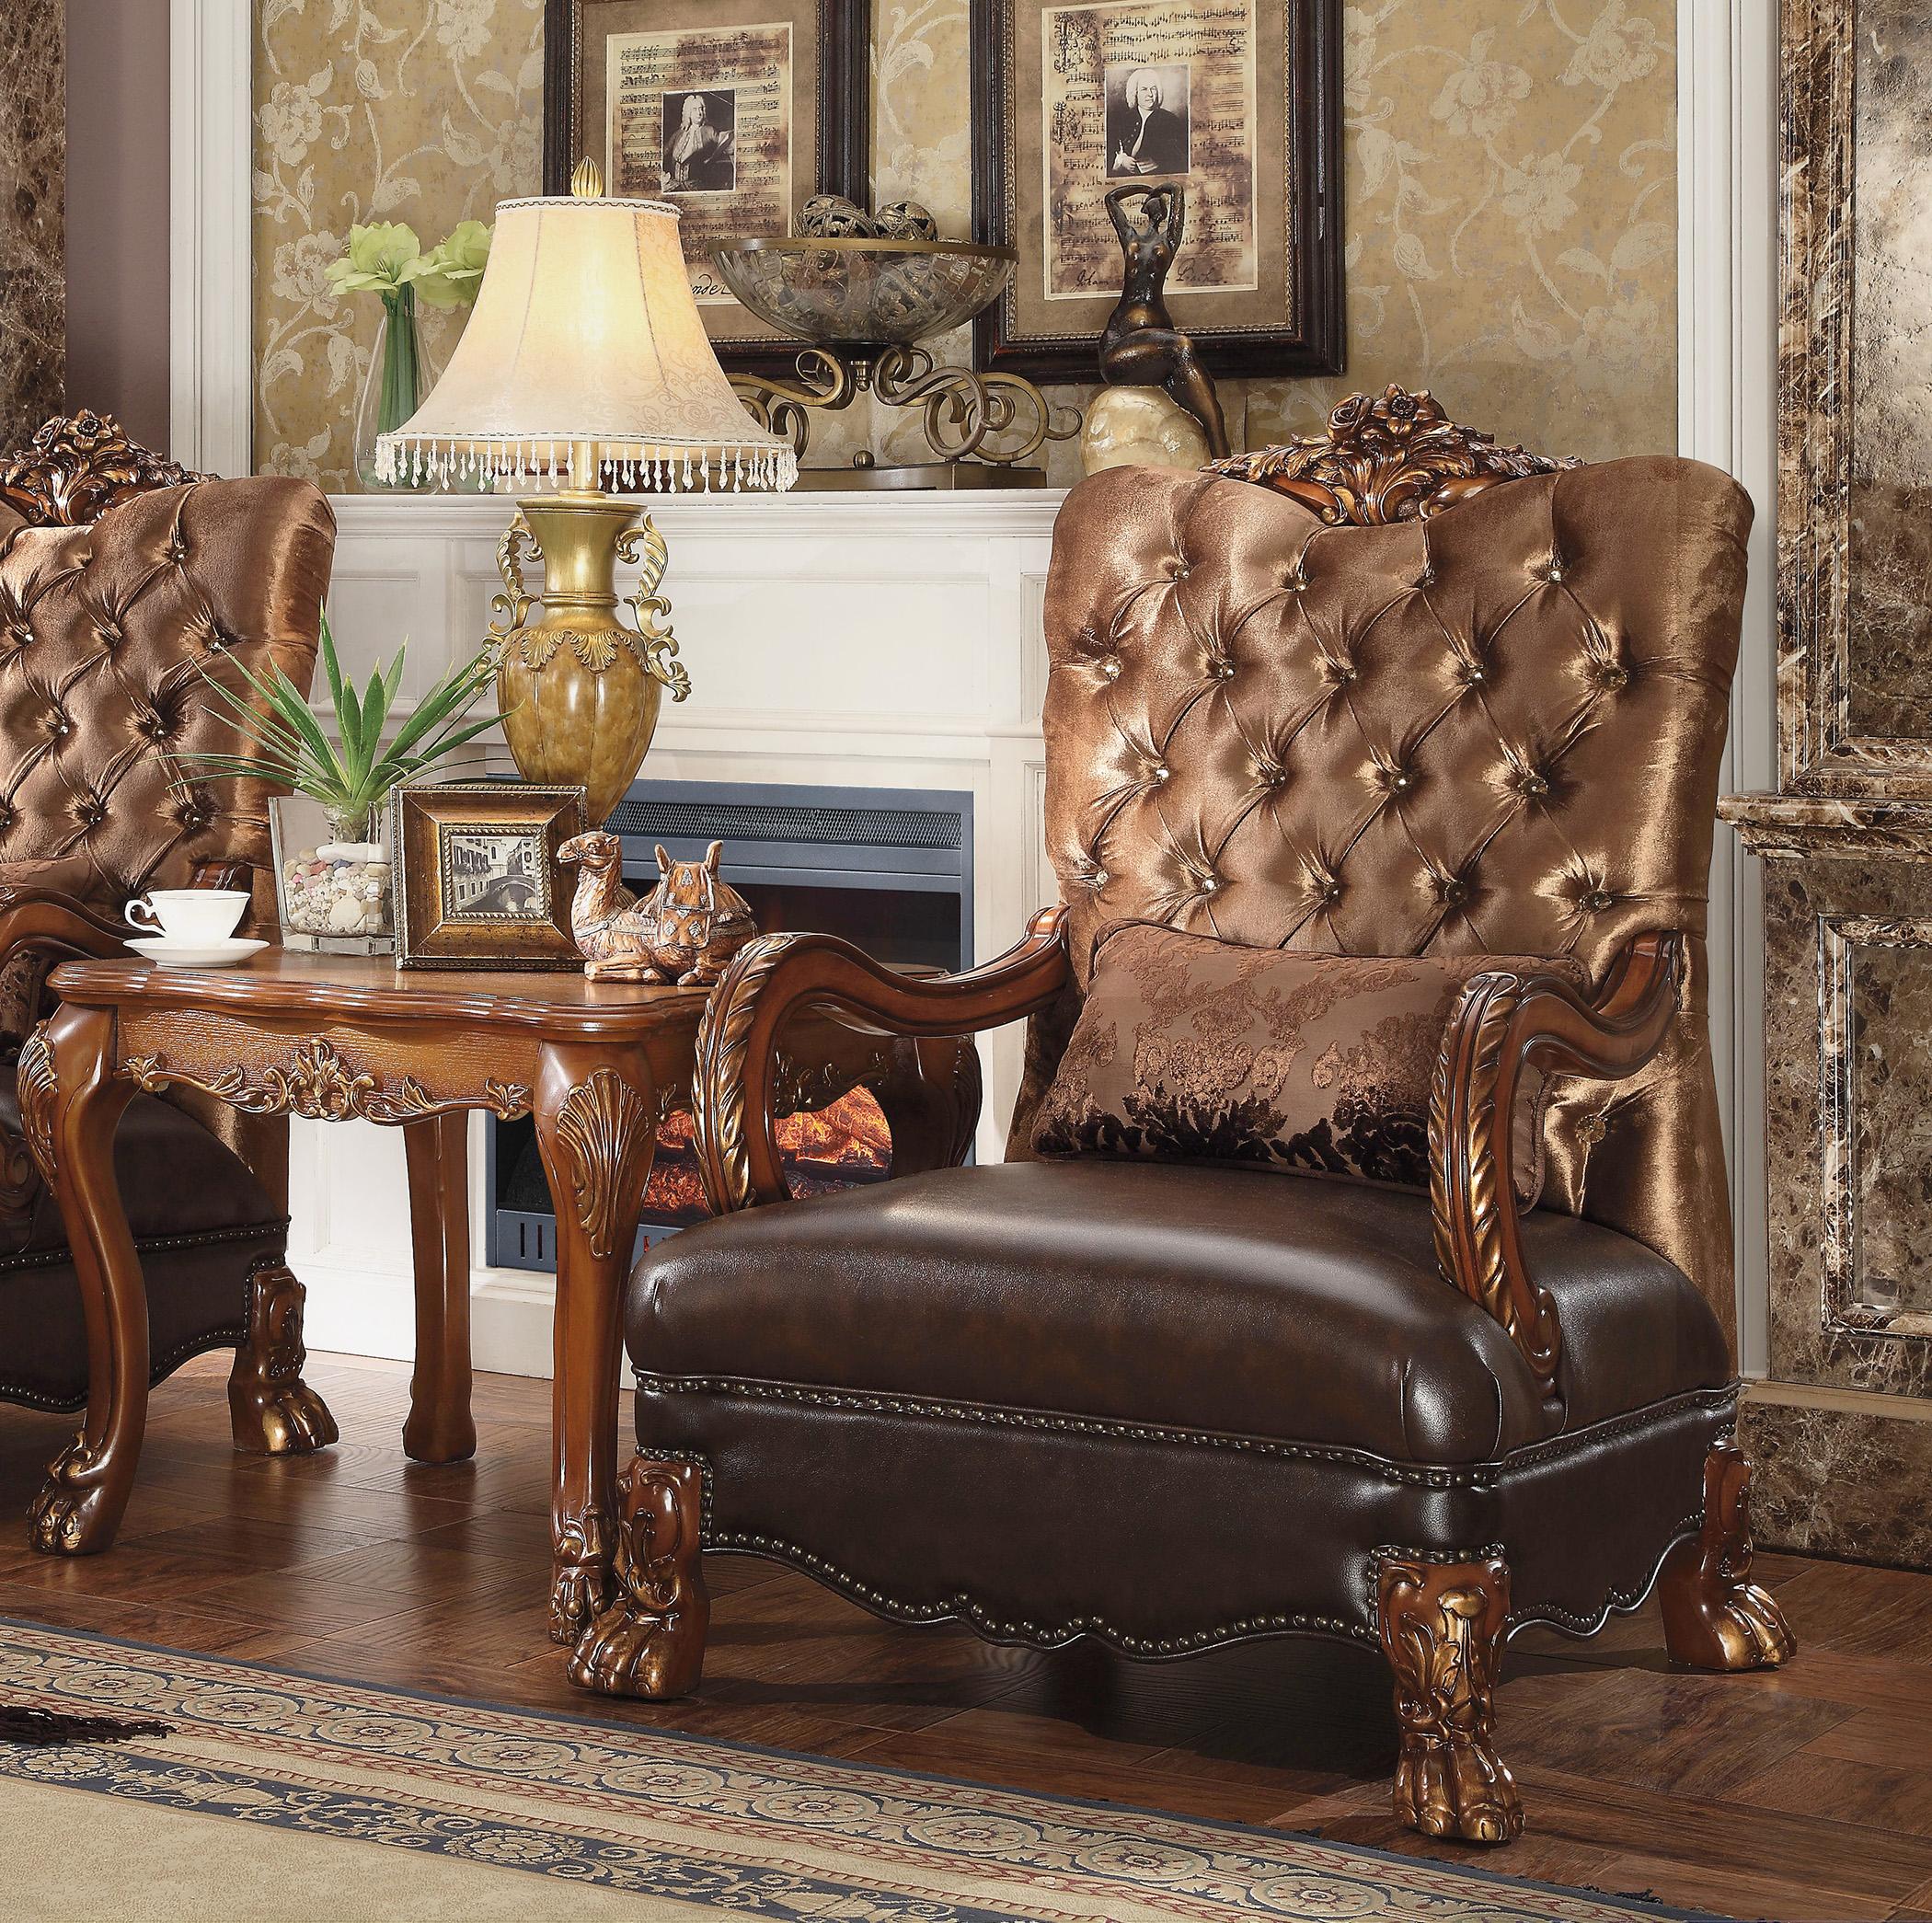 

        
Acme Furniture Dresden-52097 Accent Chair and End Table Set Oak/Golden Brown/Cherry Velvet 0840412033490
